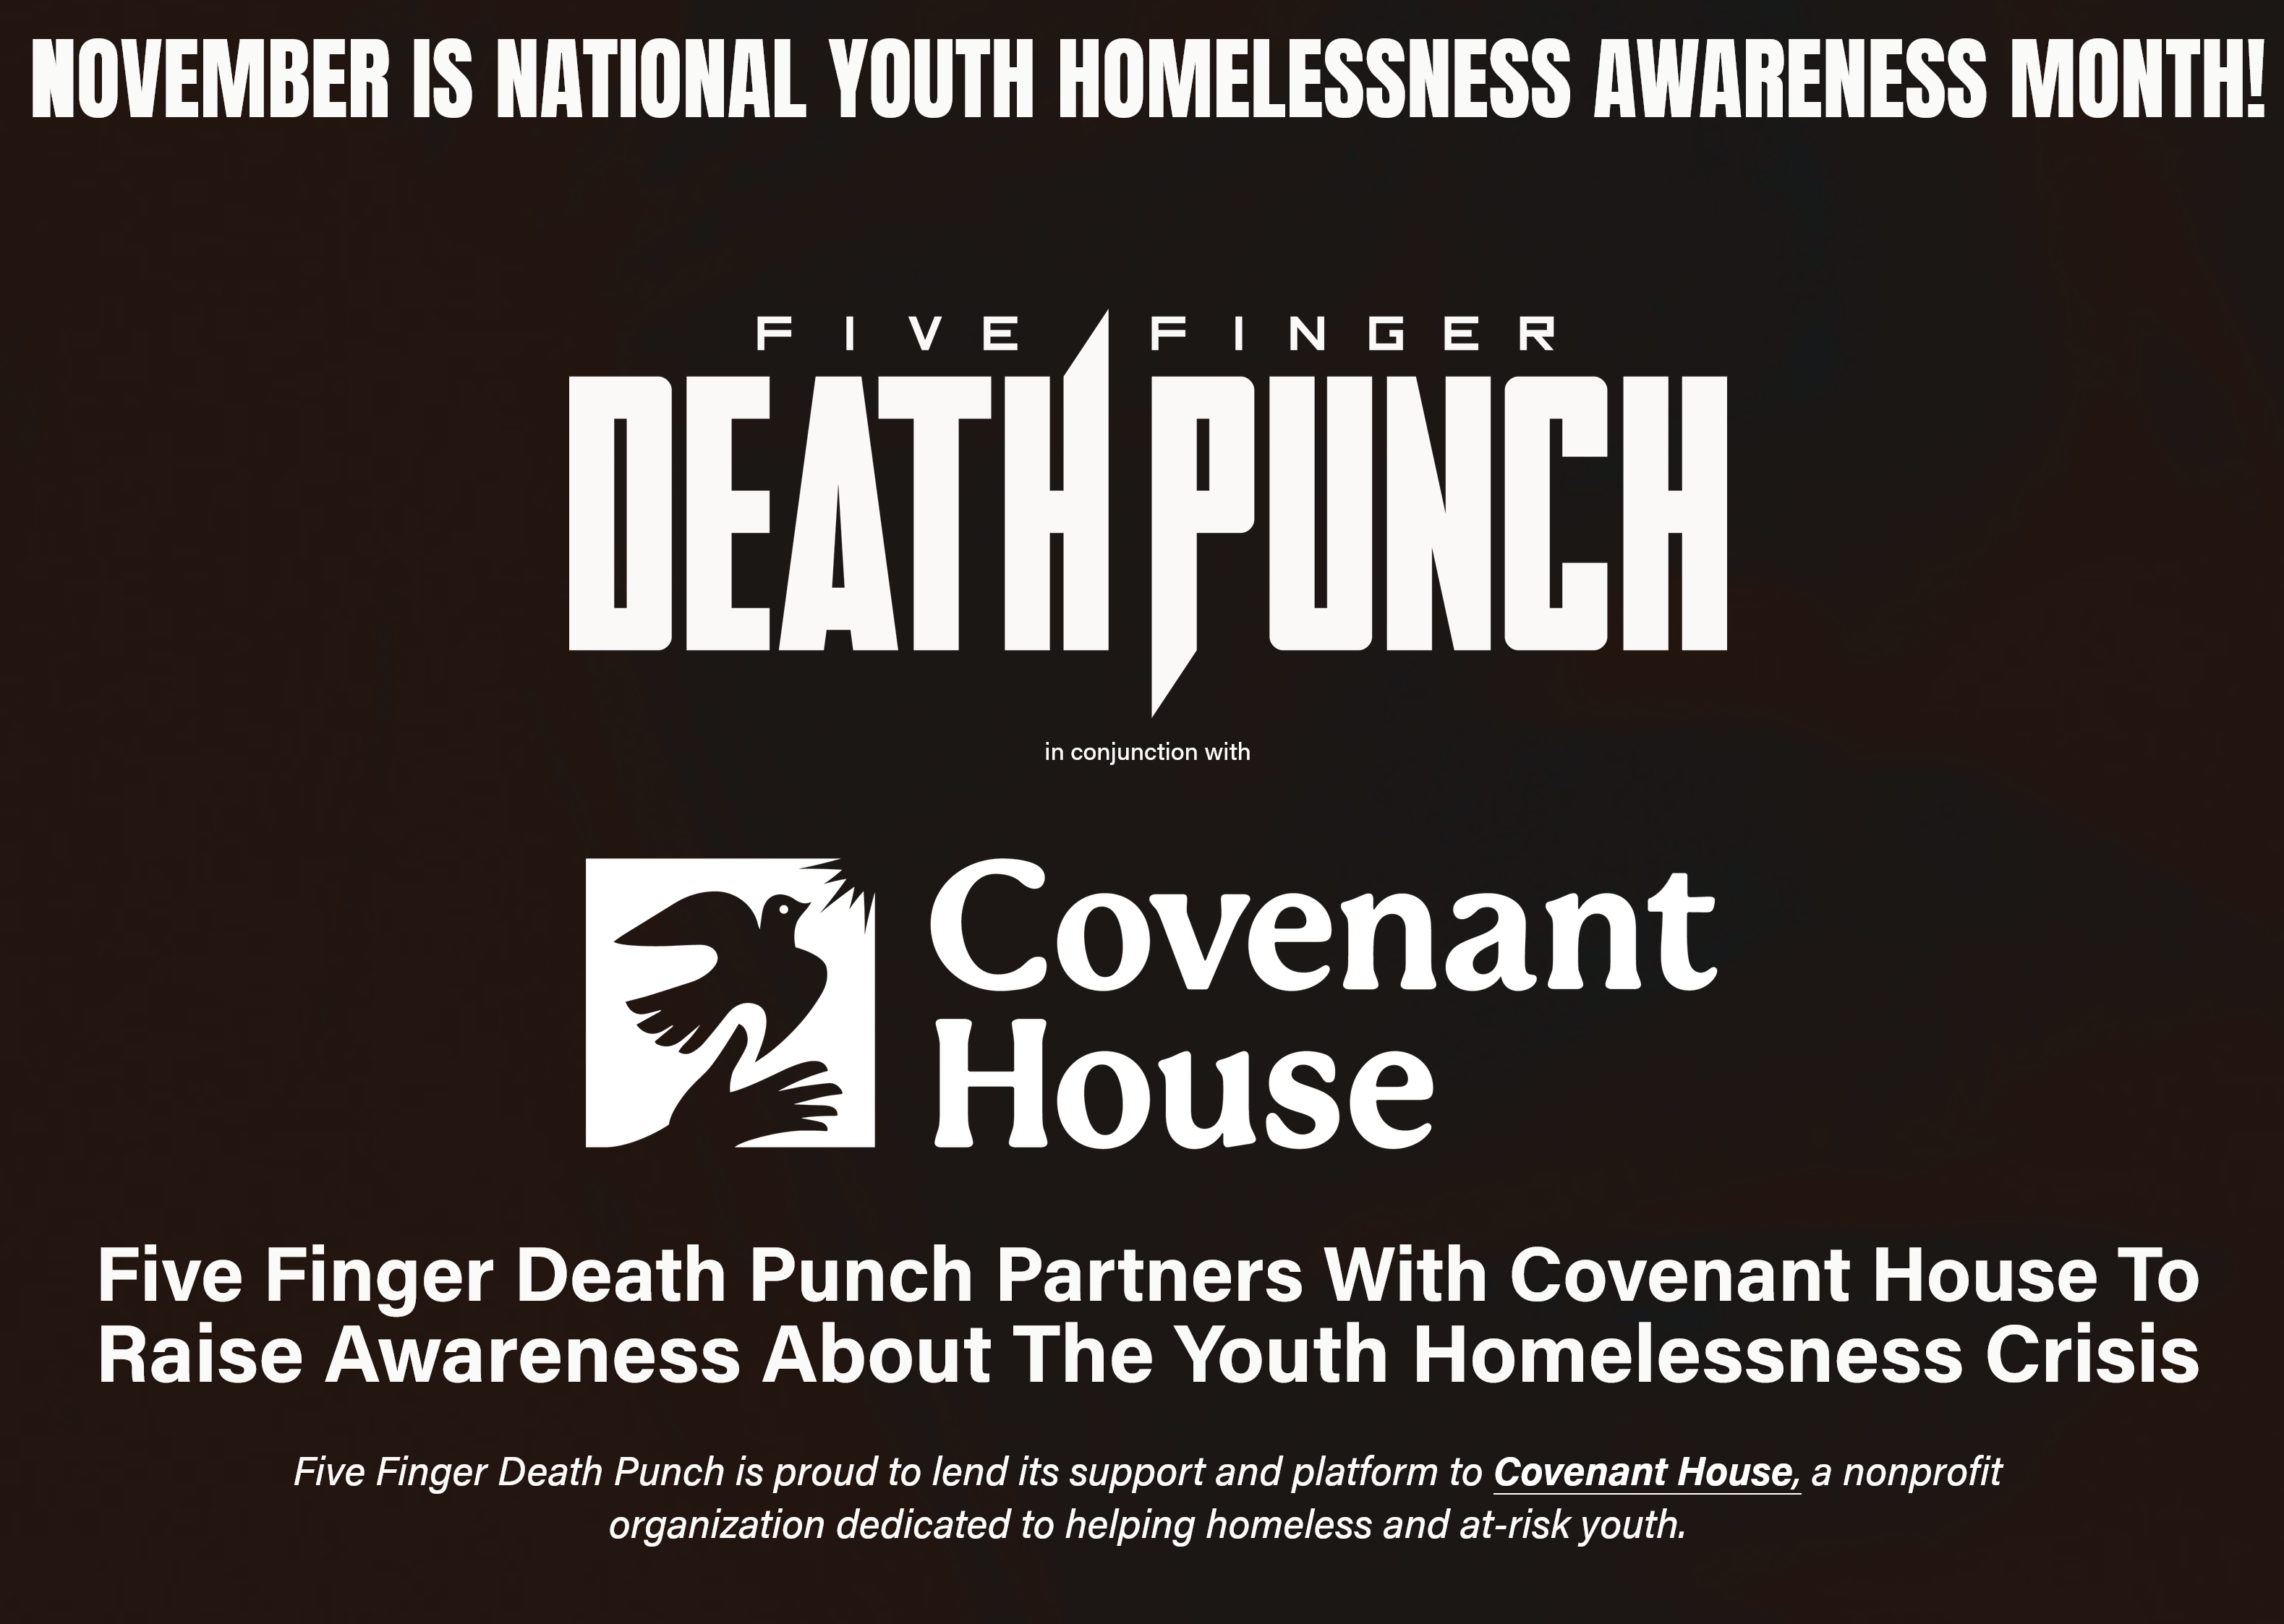 Five Finger Death Punch Partners With Covenant House To Raise Awareness About The Youth Homelessness Crisis